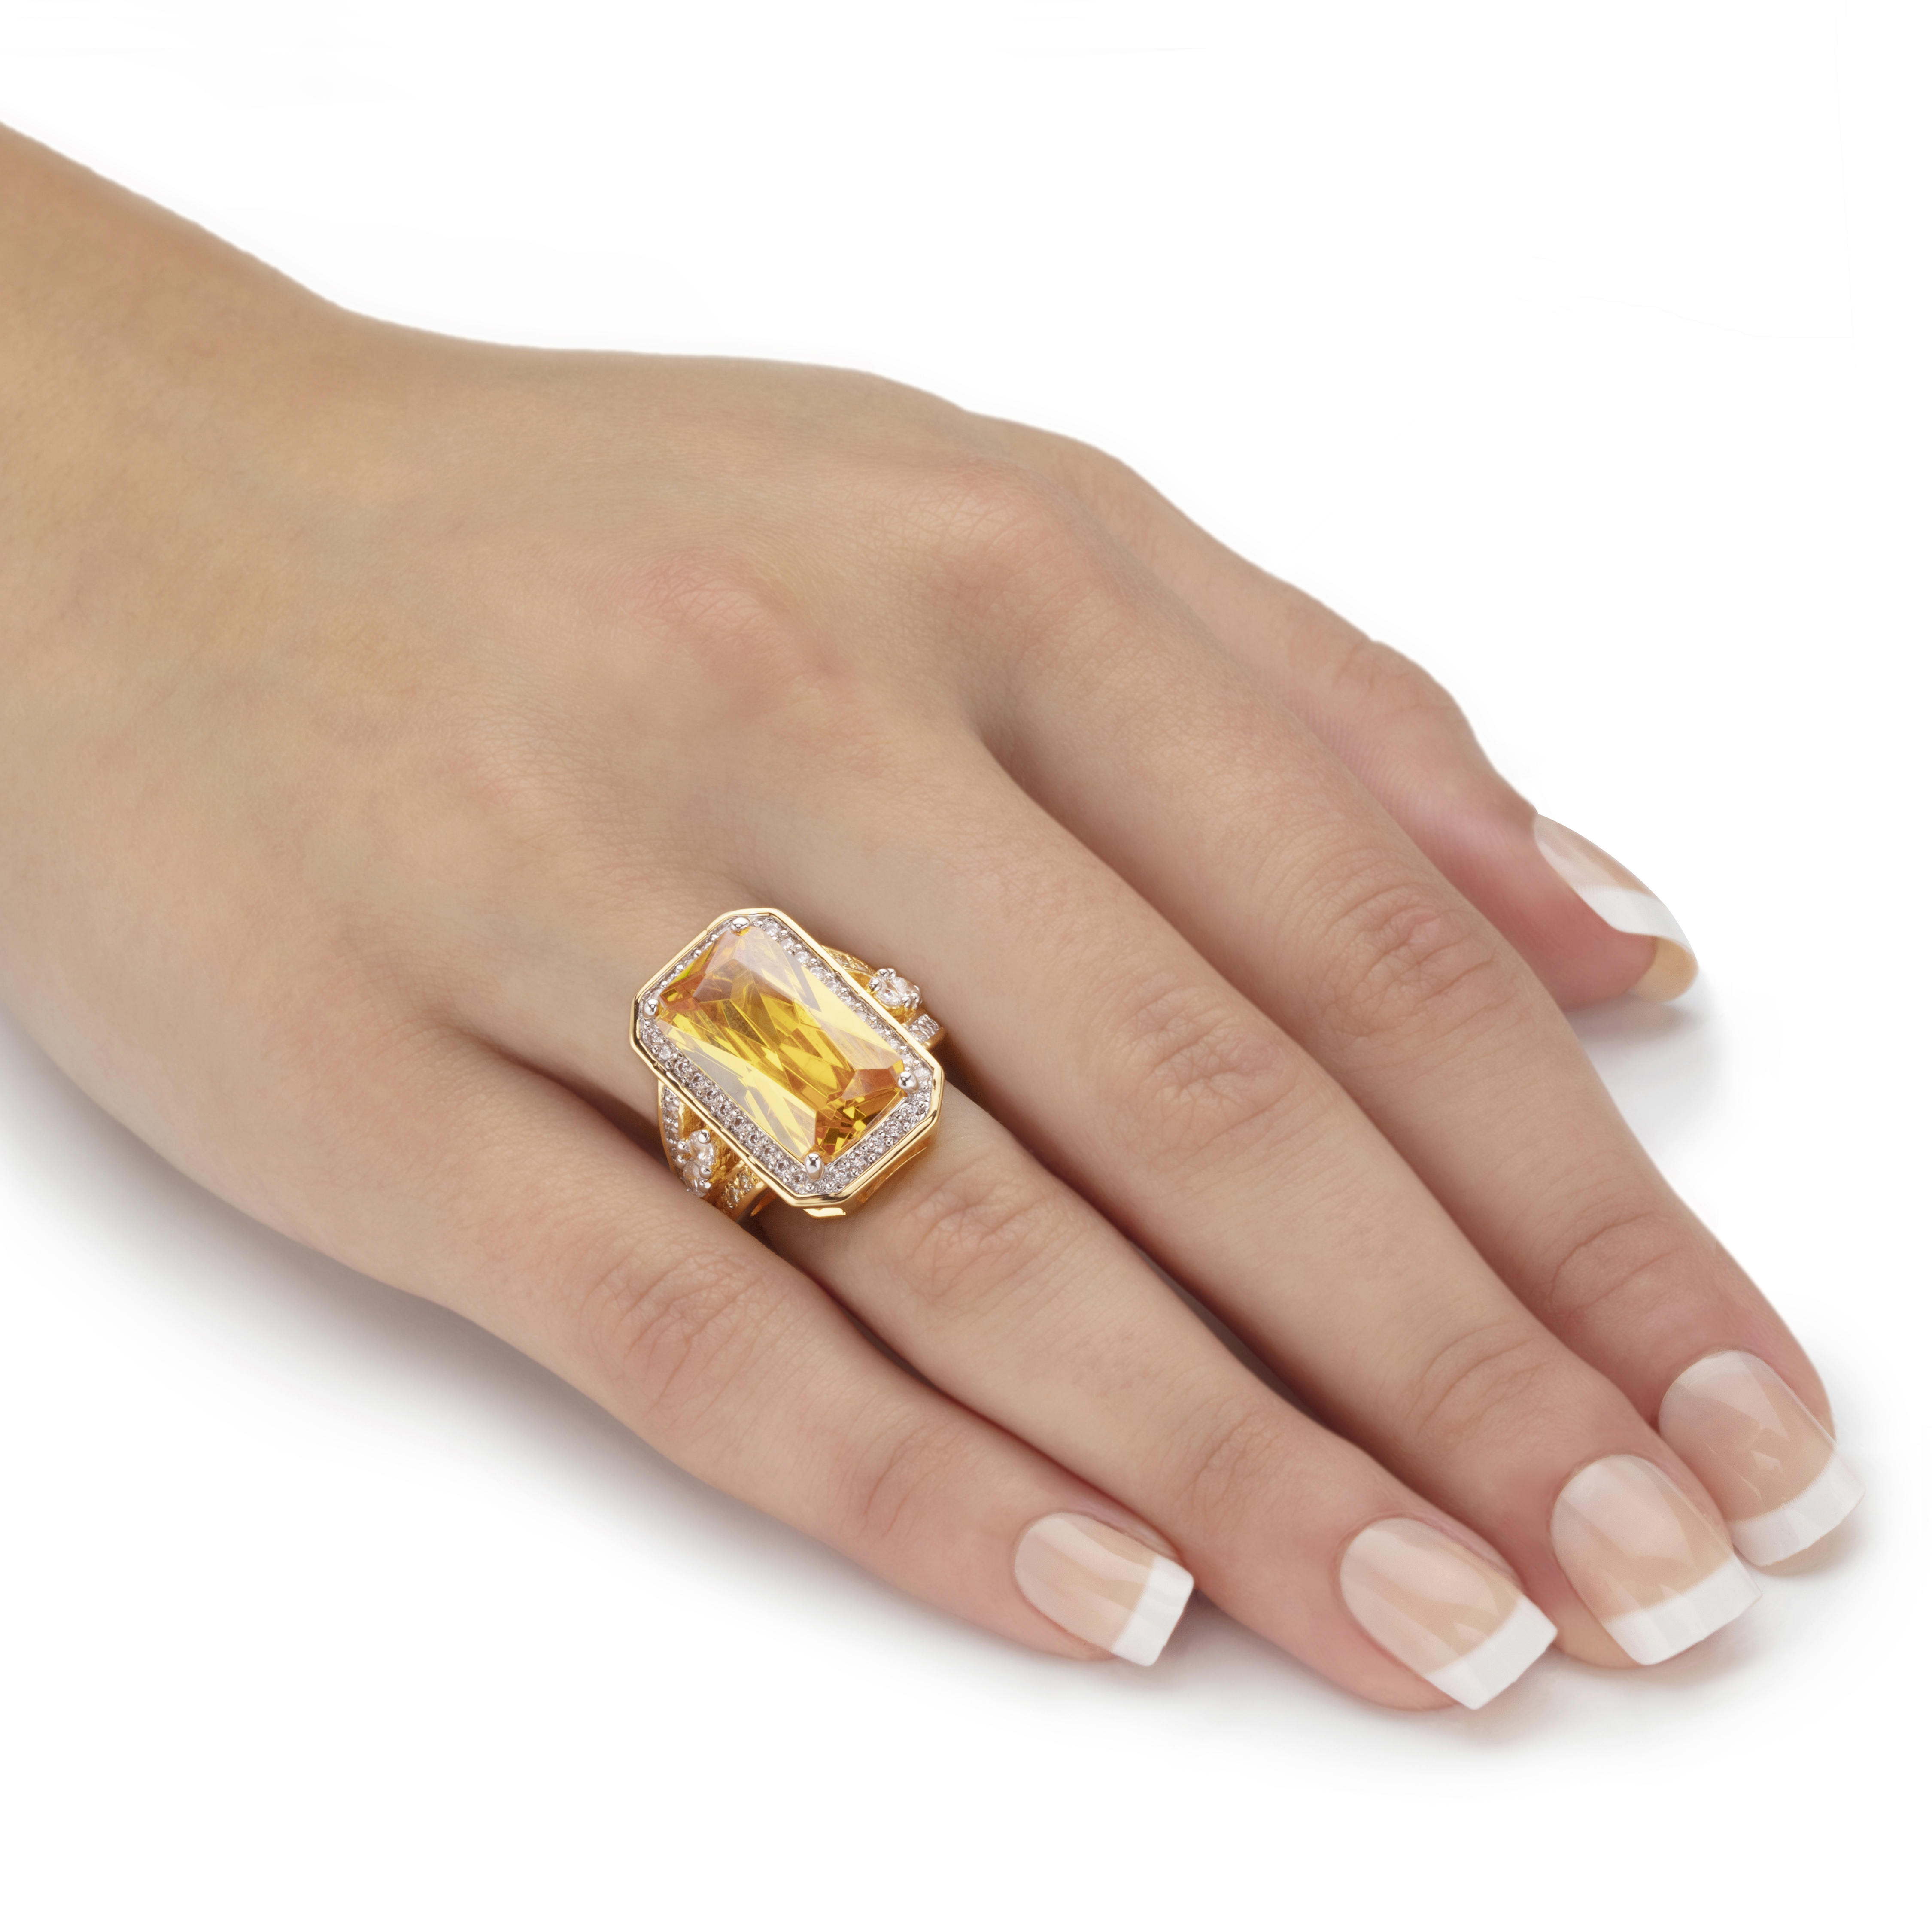 PalmBeach Jewelry 19.52 TCW Emerald-Cut Canary Yellow Cubic Zirconia Cocktail Ring Yellow Gold-Plated